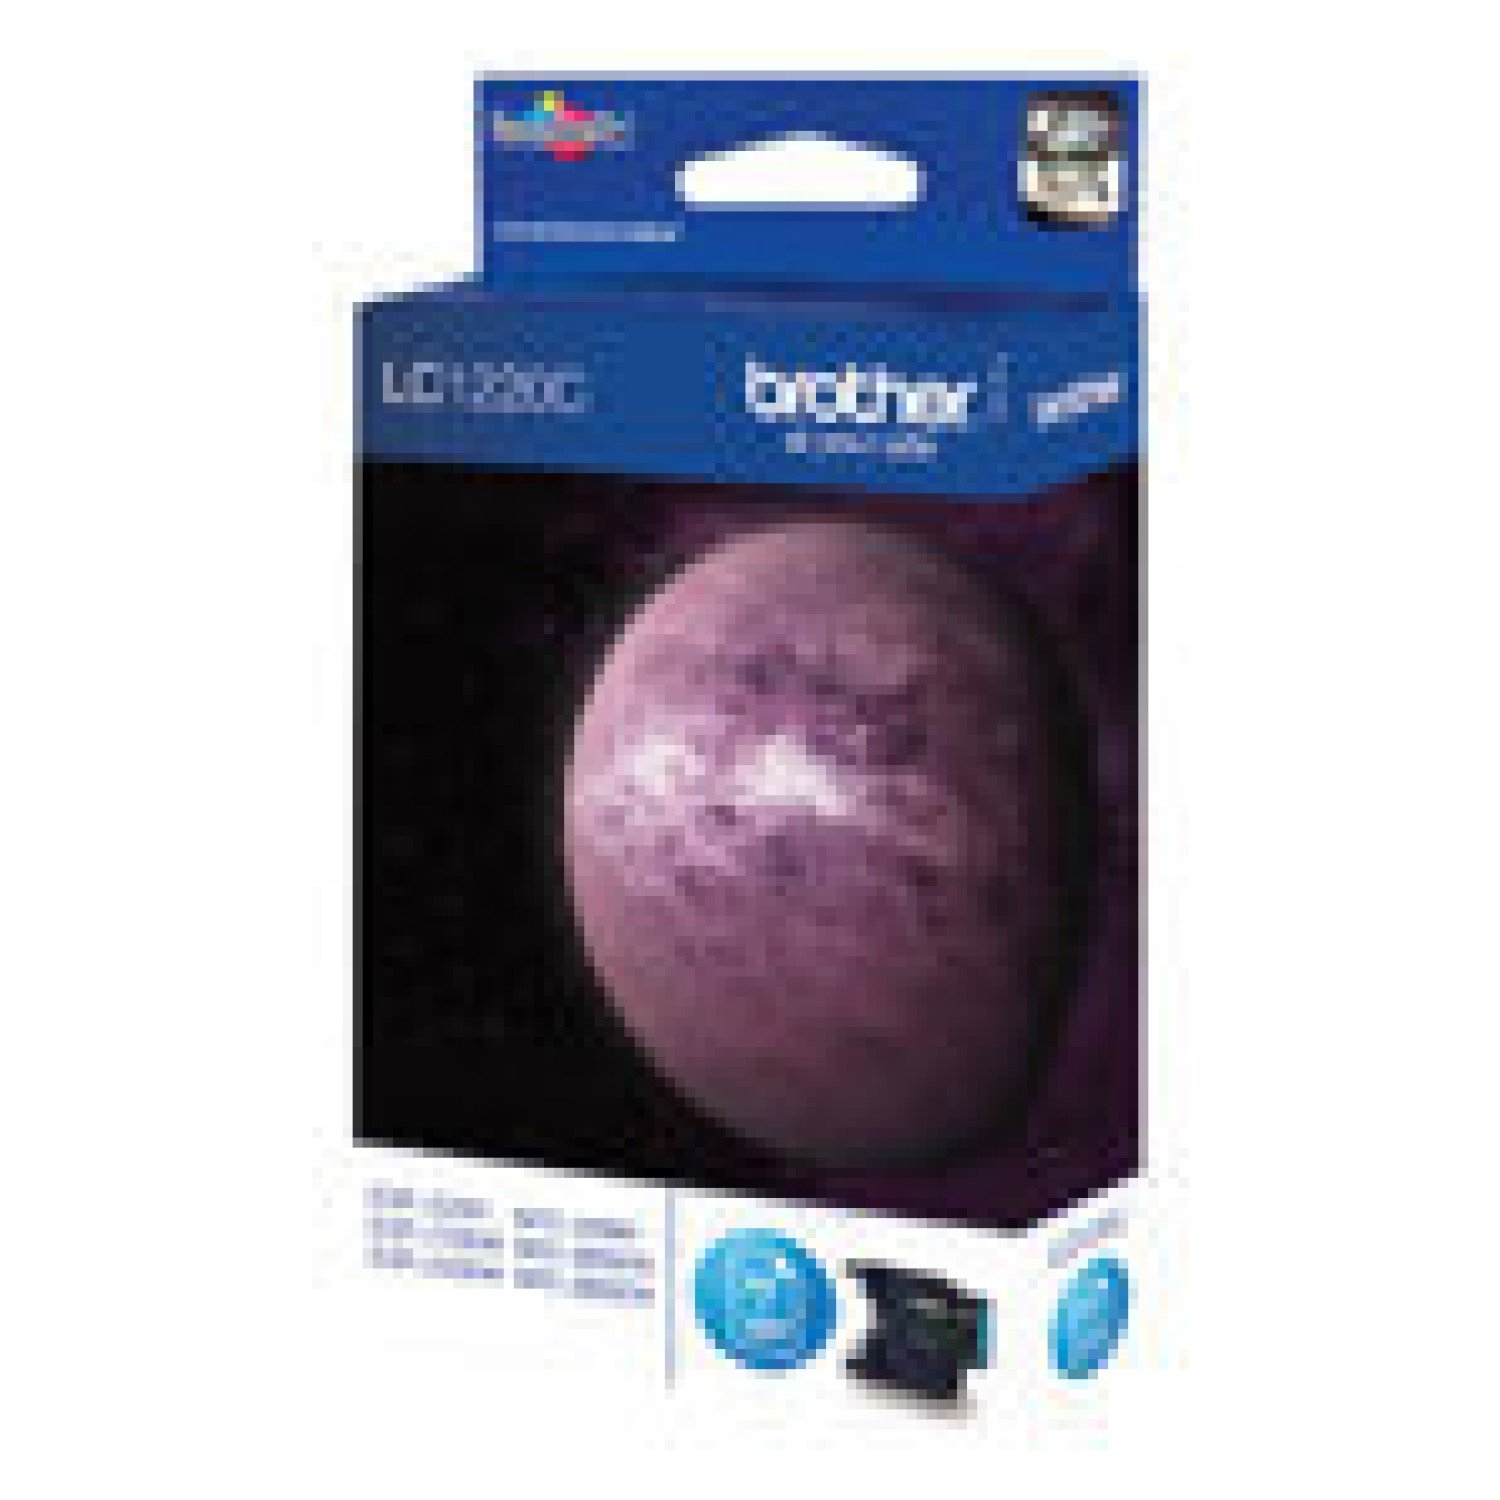 BROTHER Ink Cartridge LC-1220 C